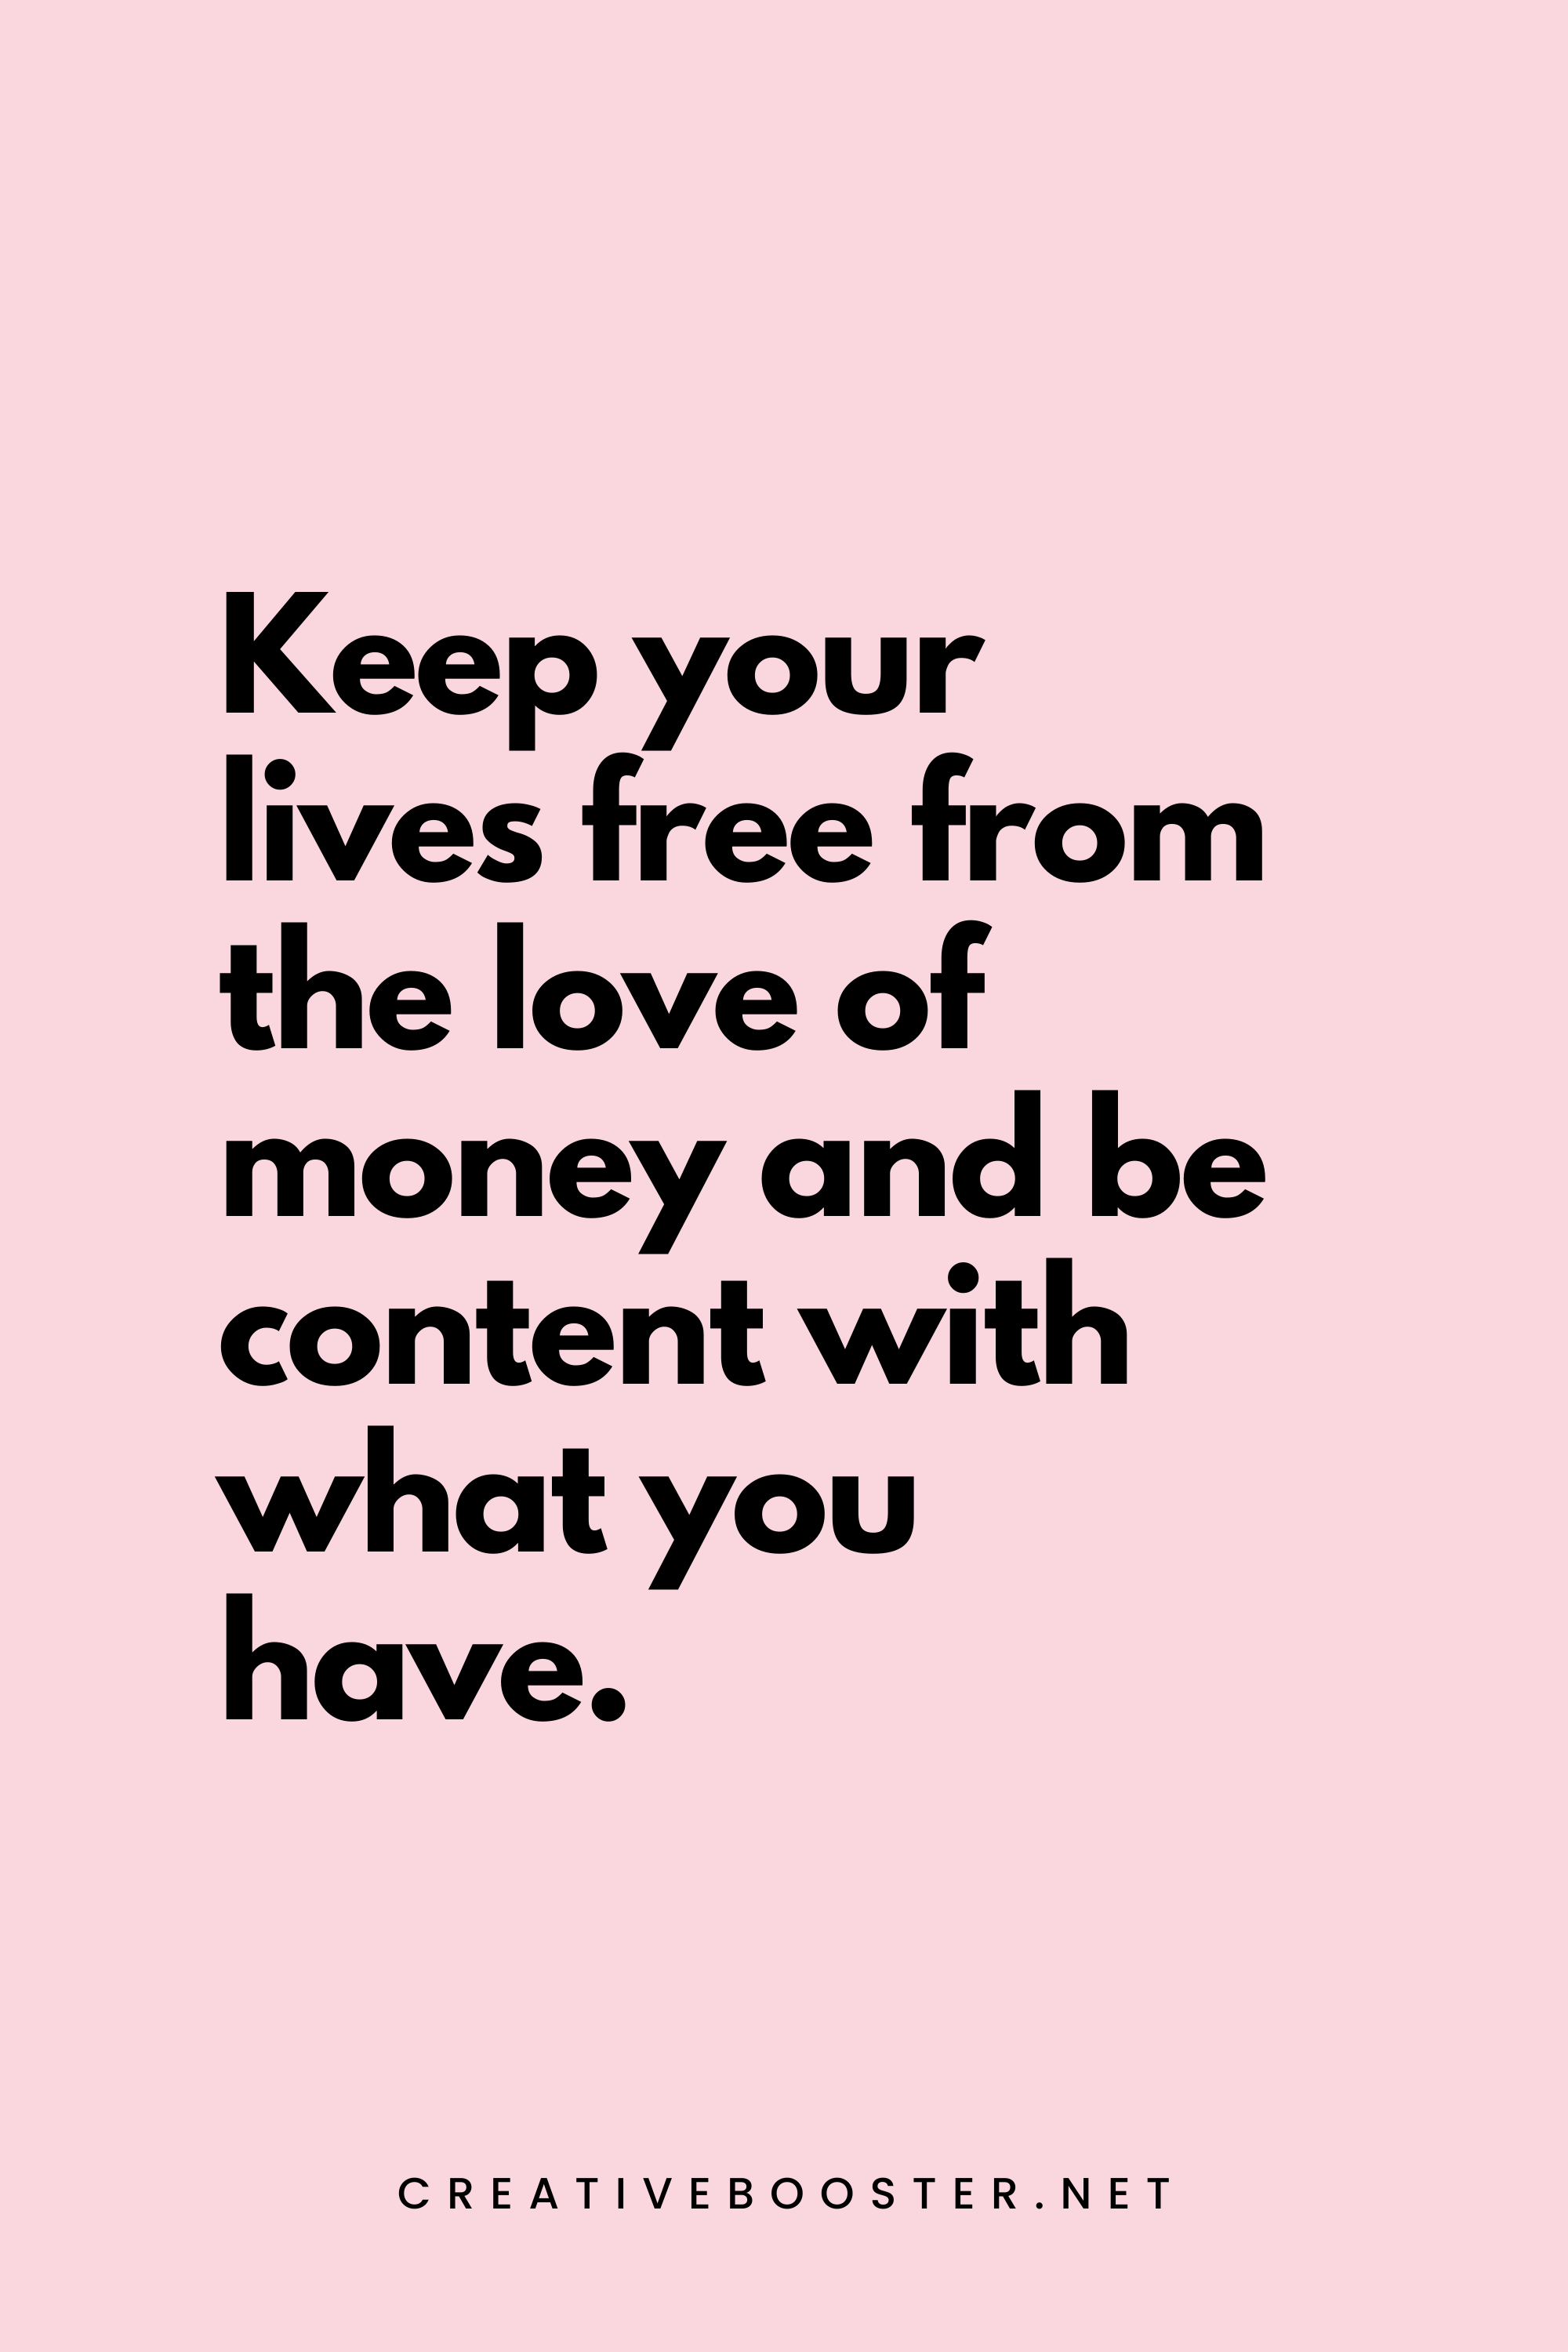 52. Keep your lives free from the love of money and be content with what you have. - Hebrews 13:5 - 5.